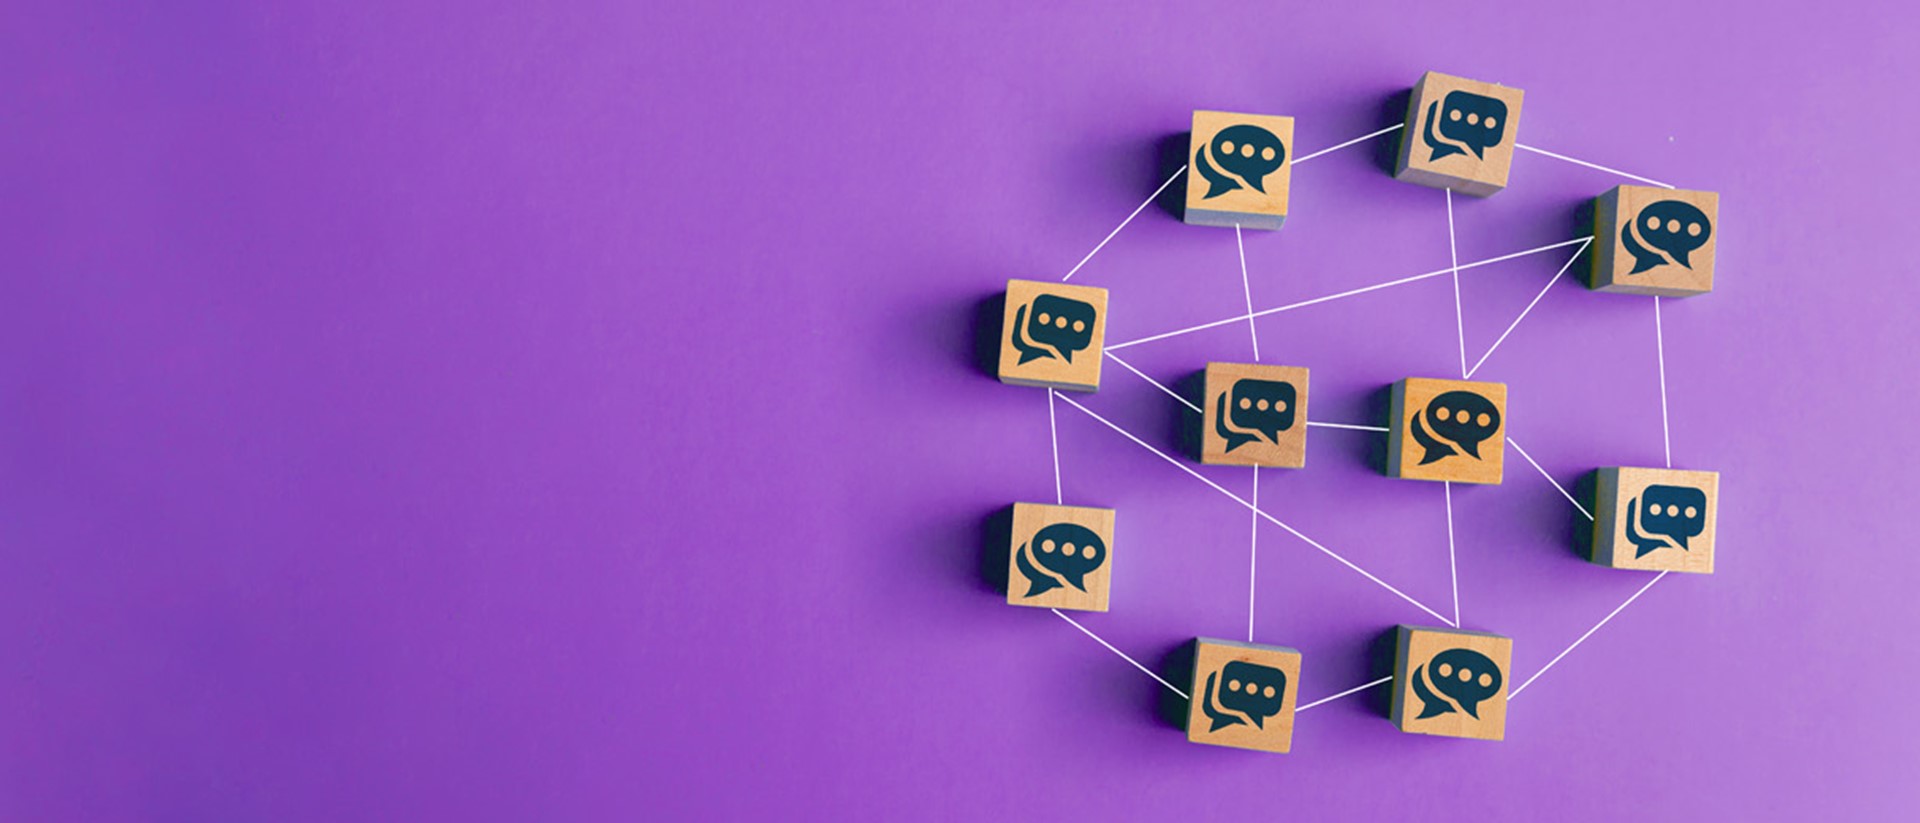 A web of multiple wooden blocks, each with a symbol of a brain against a purple background.